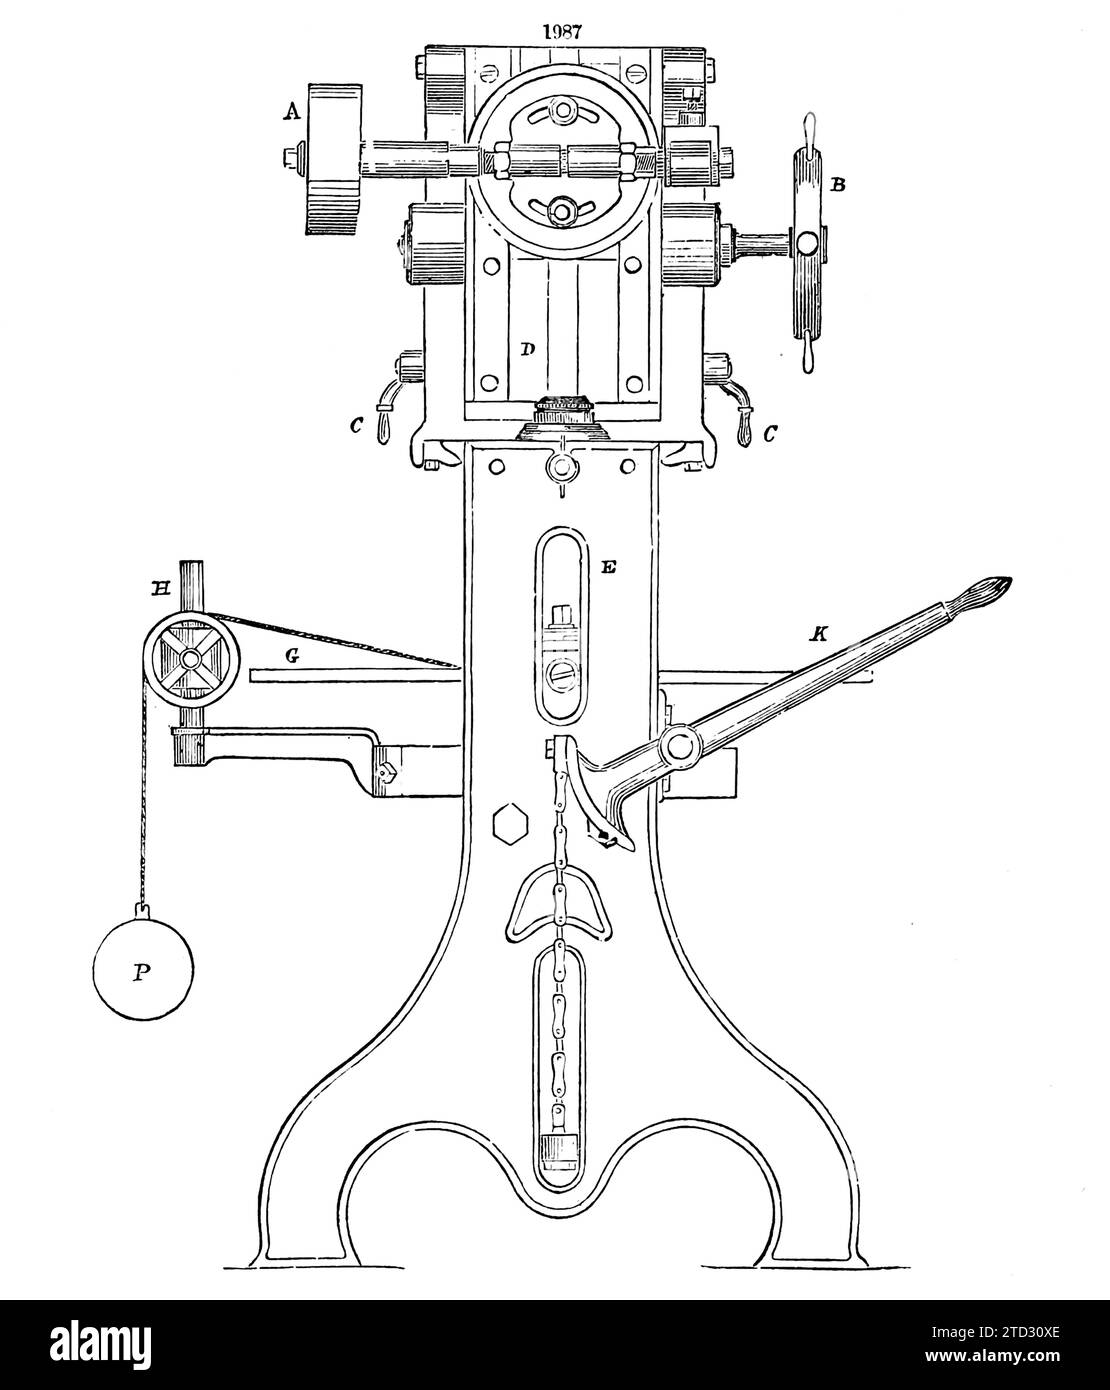 Gearing and gear-cutting machine, illustration. From 'Appleton's dictionary of machines, mechanics, engine-work, and engineering' by D Appleton and Company. Publication date 1874. Stock Photo